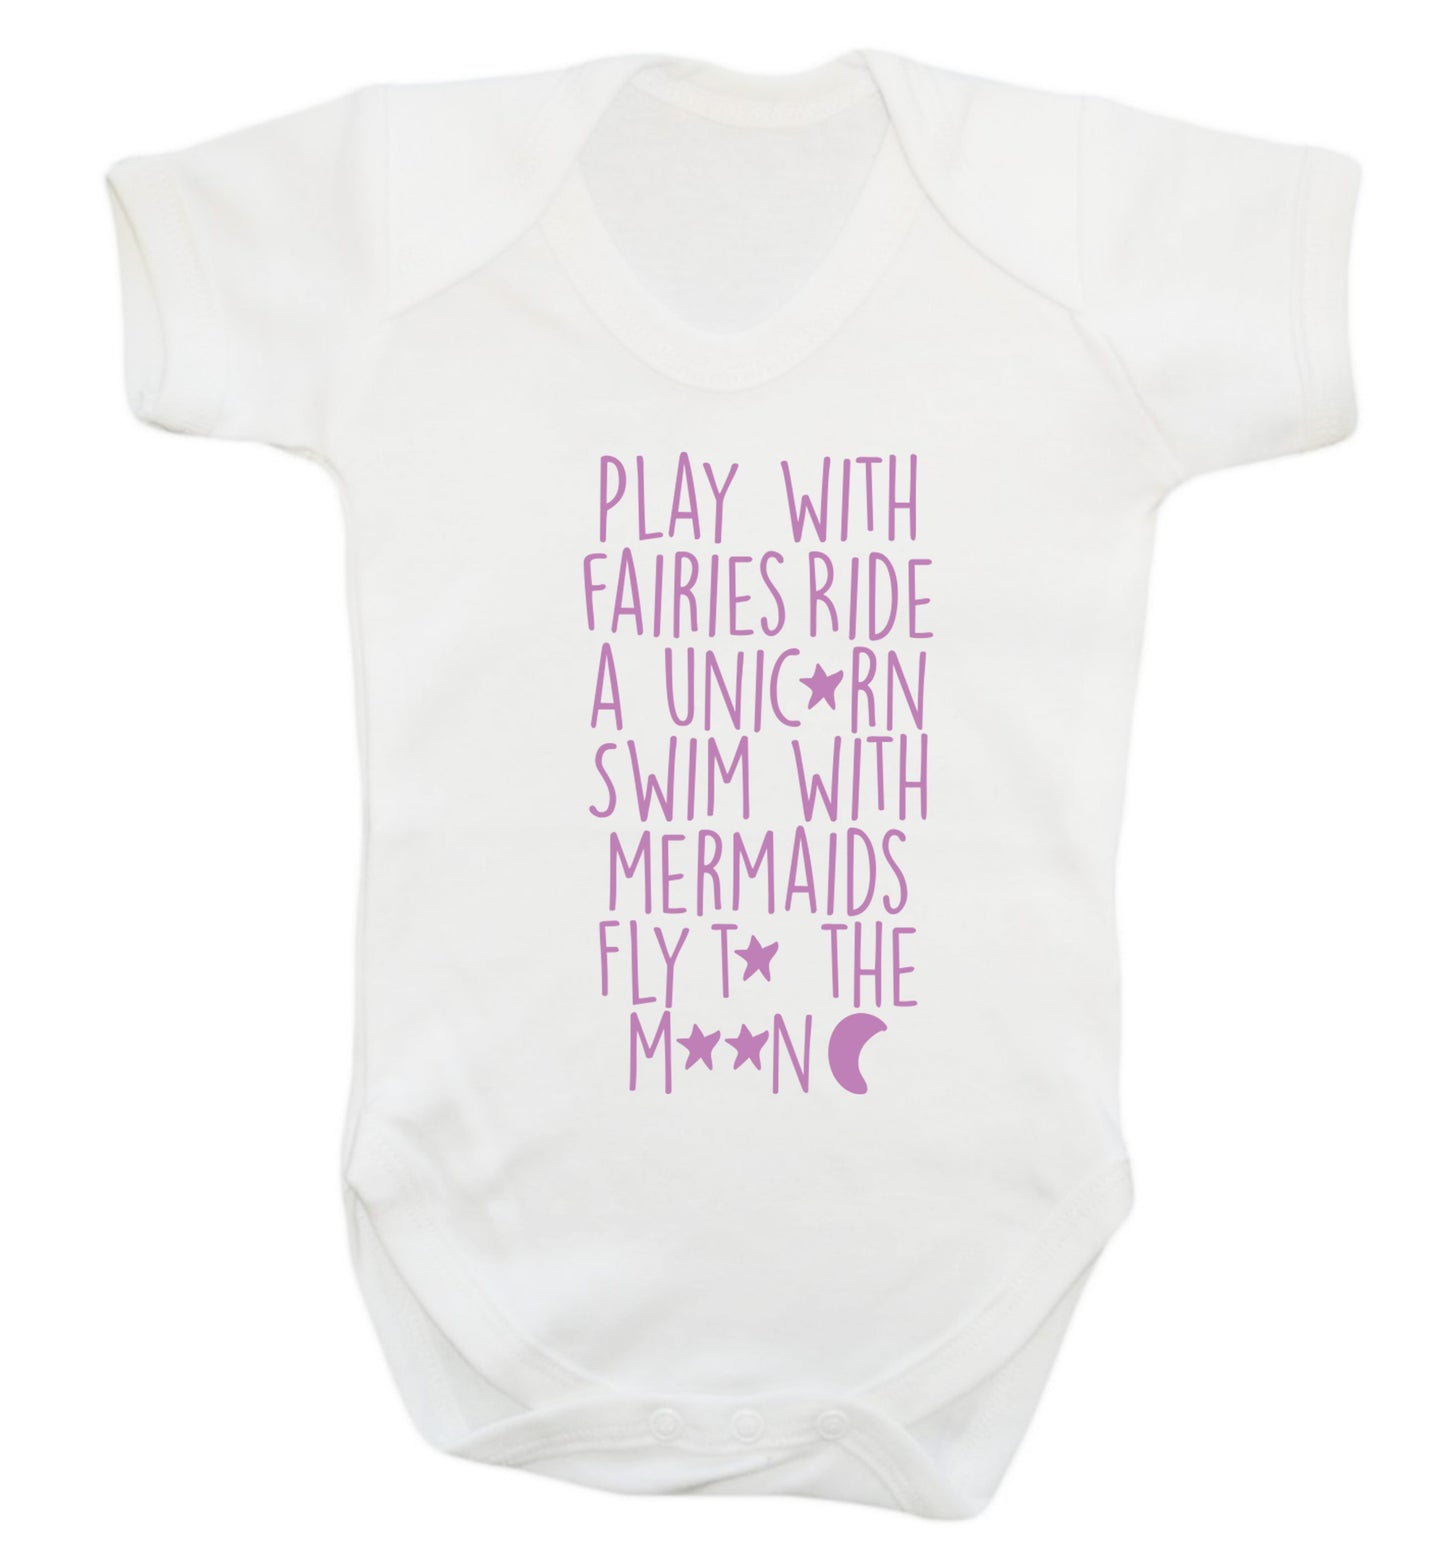 Play with fairies ride a unicorn swim with mermaids fly to the moon Baby Vest white 18-24 months